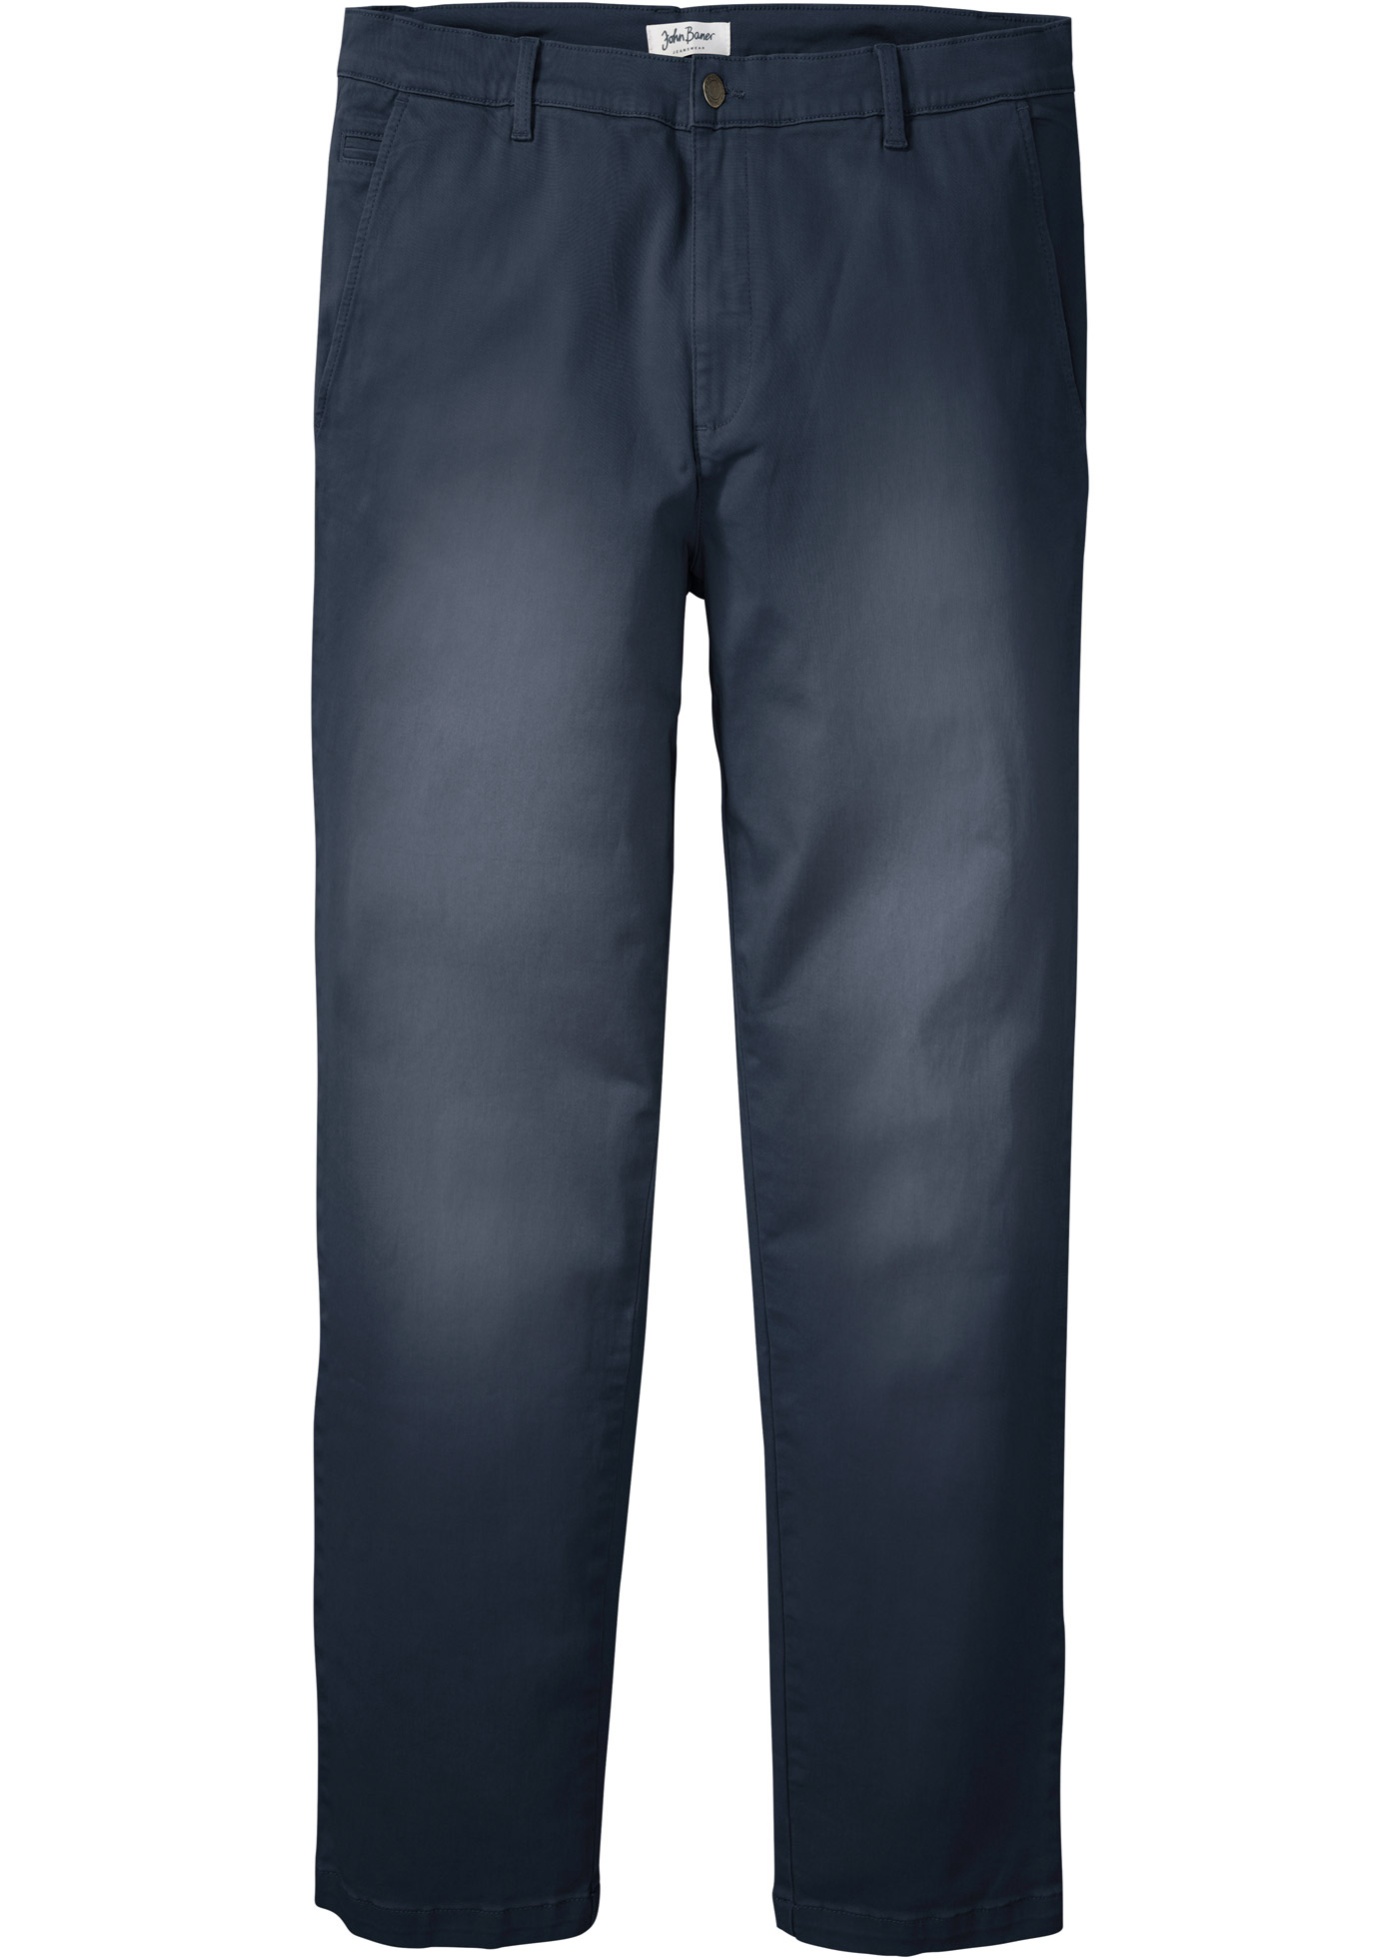 Classic fit coloured chino jeans, tapered